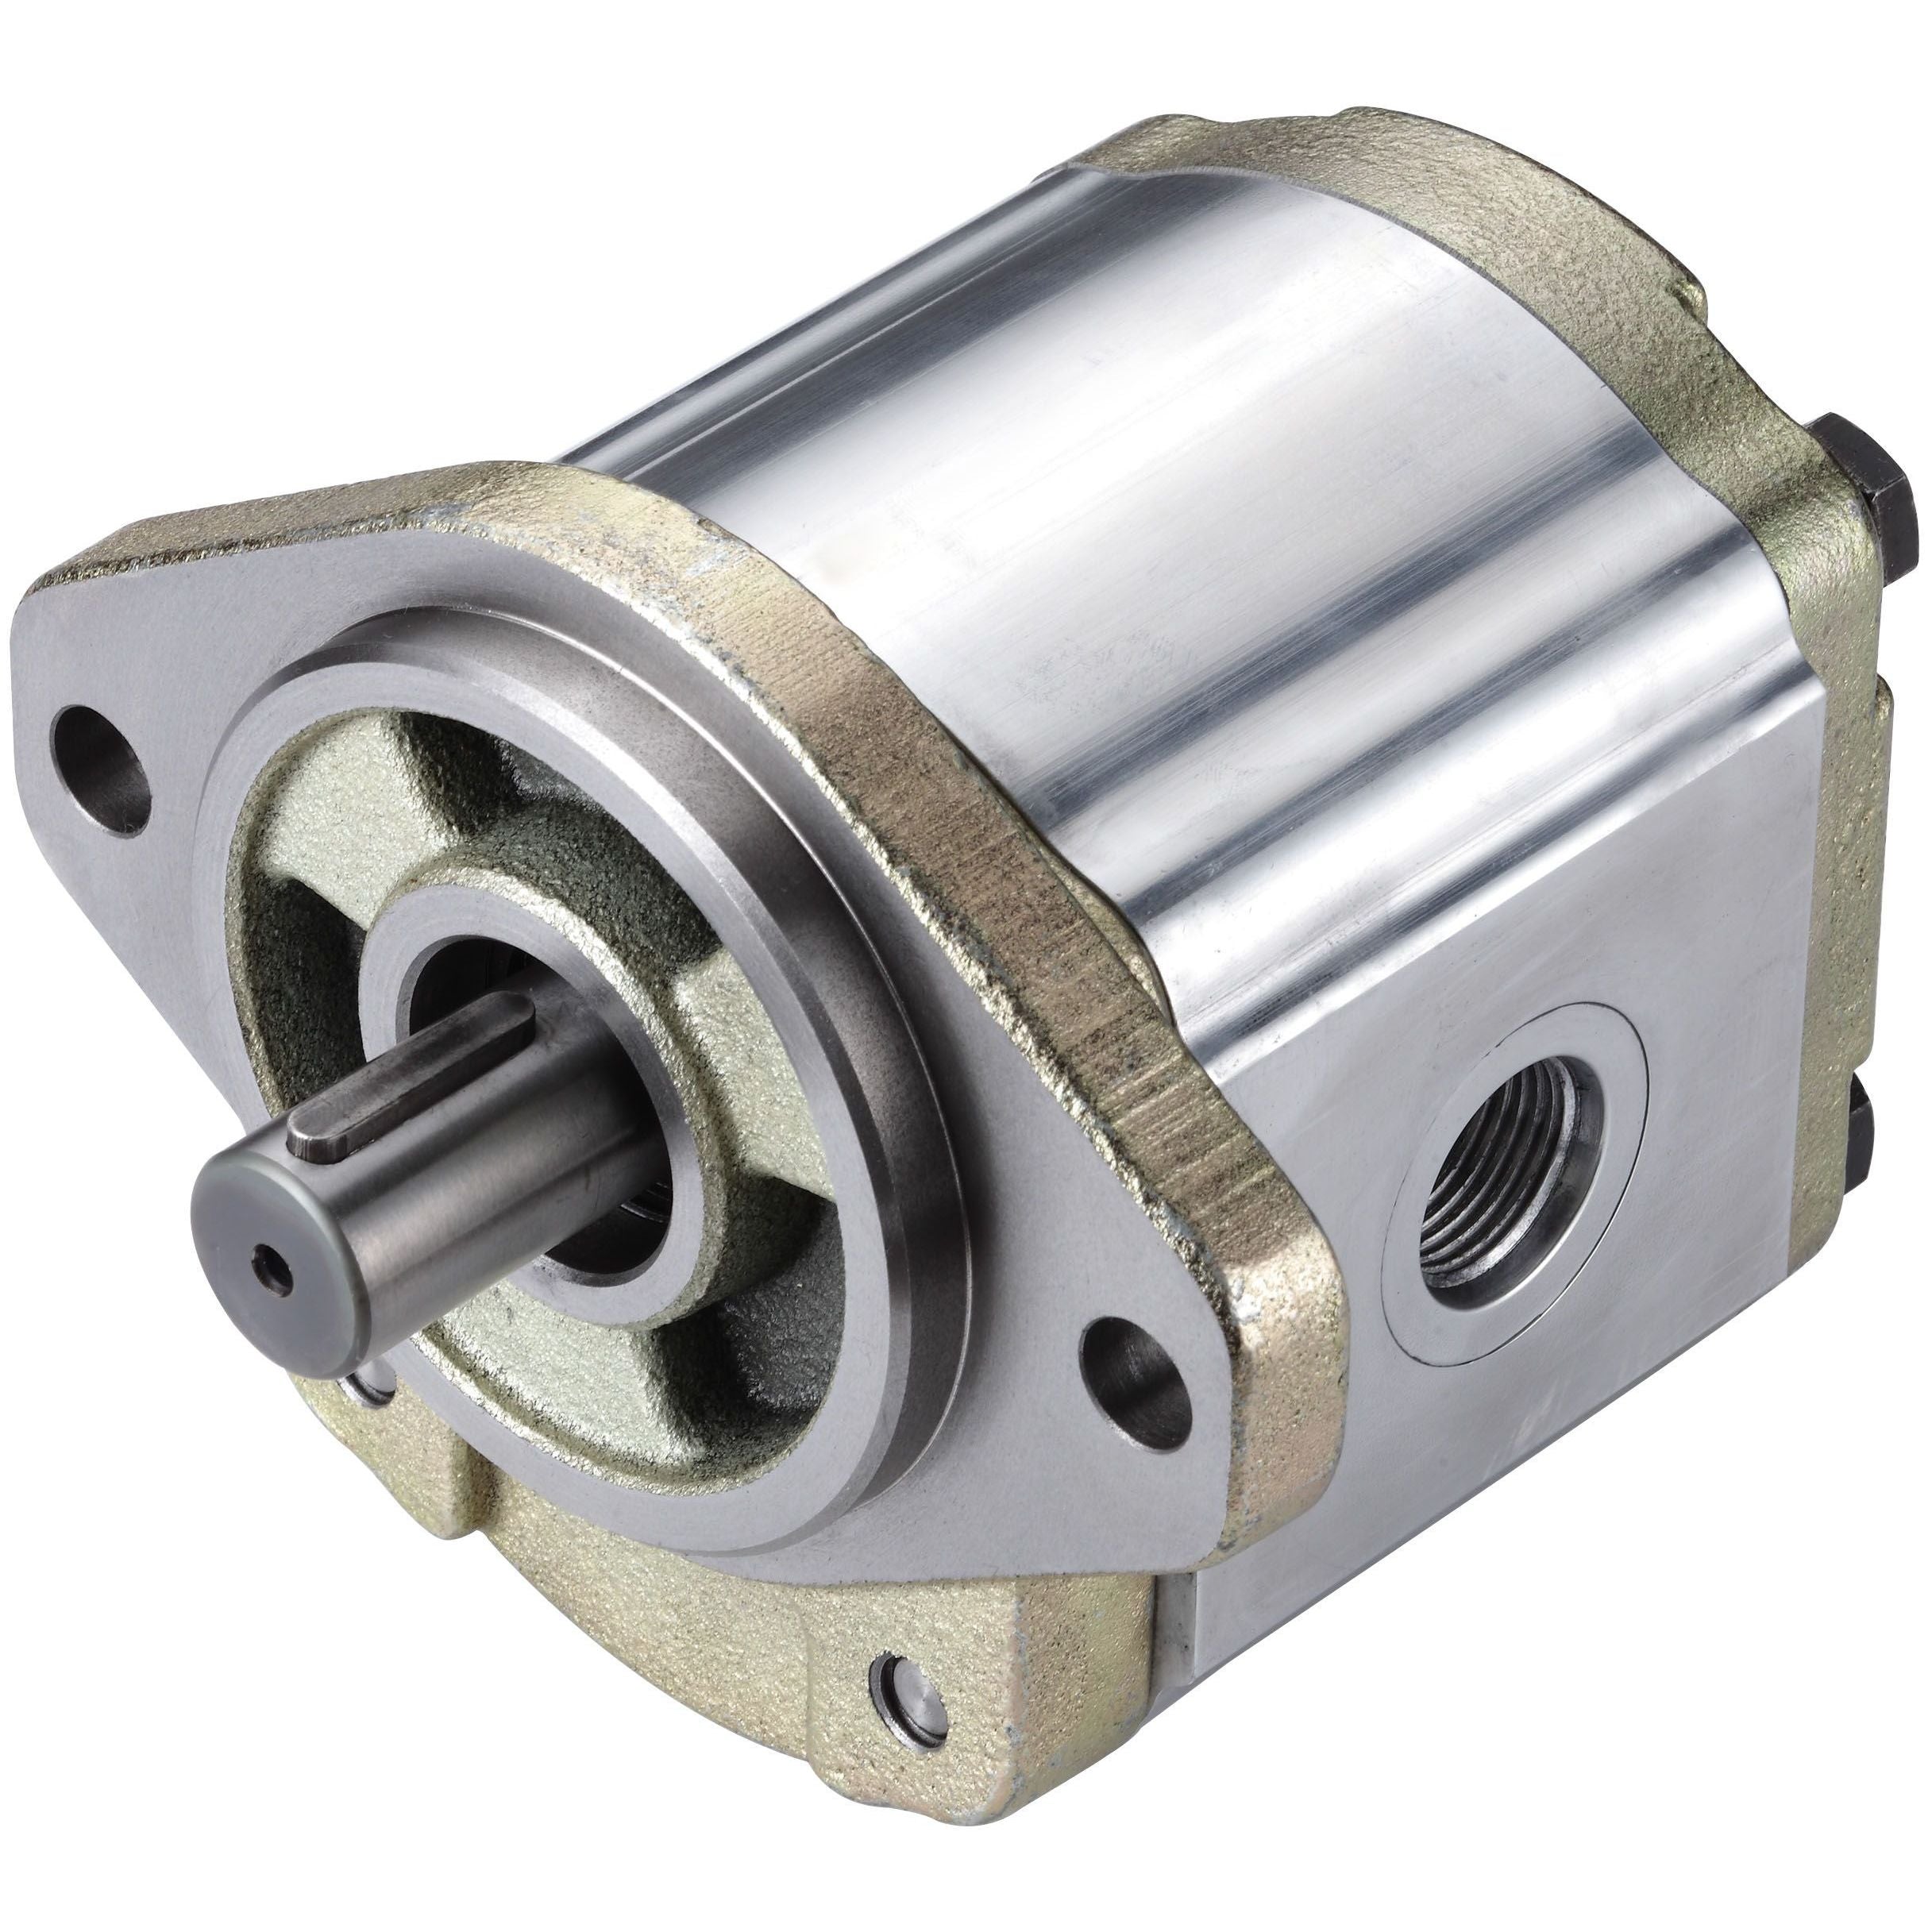 3GB8U152R : Honor Gear Pump, CW Rotation, 52cc (3.17in3), 24.73 GPM, 2800psi, 2500 RPM, #16 SAE (1") In, #16 SAE (1") Out, Splined Shaft 13-Tooth, 16/32 Pitch, SAE B 2-Bolt Mount